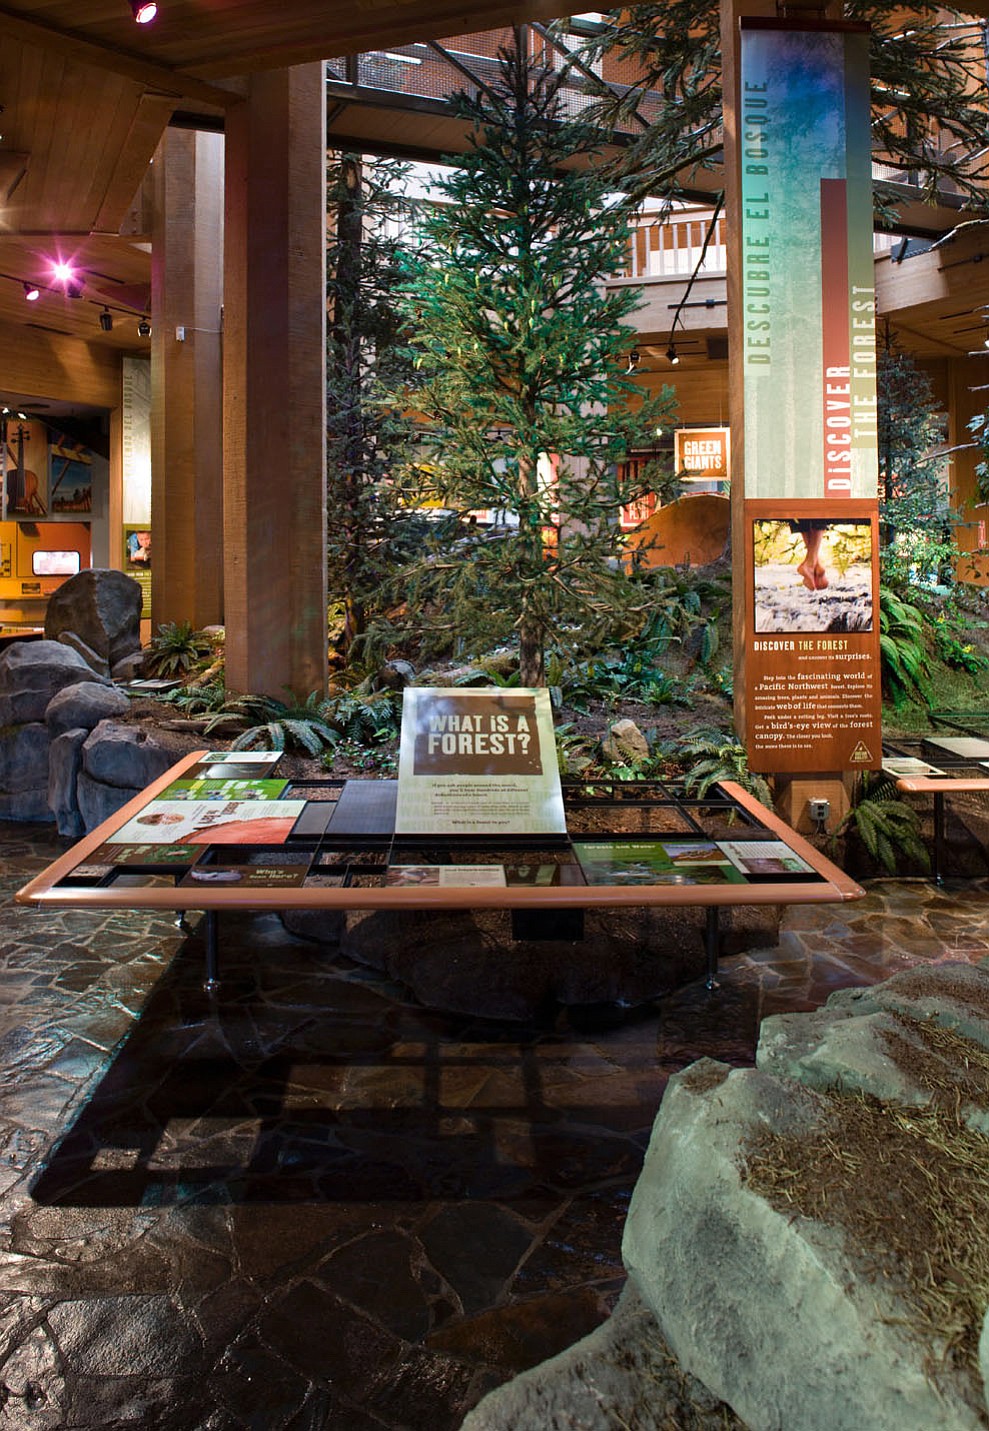 Those ages 21 and older can explore the exhibits after-hour during Museum By Moonlight, Nov. 20, 2014 at the World Forestry Center Discovery Museum in Portland.